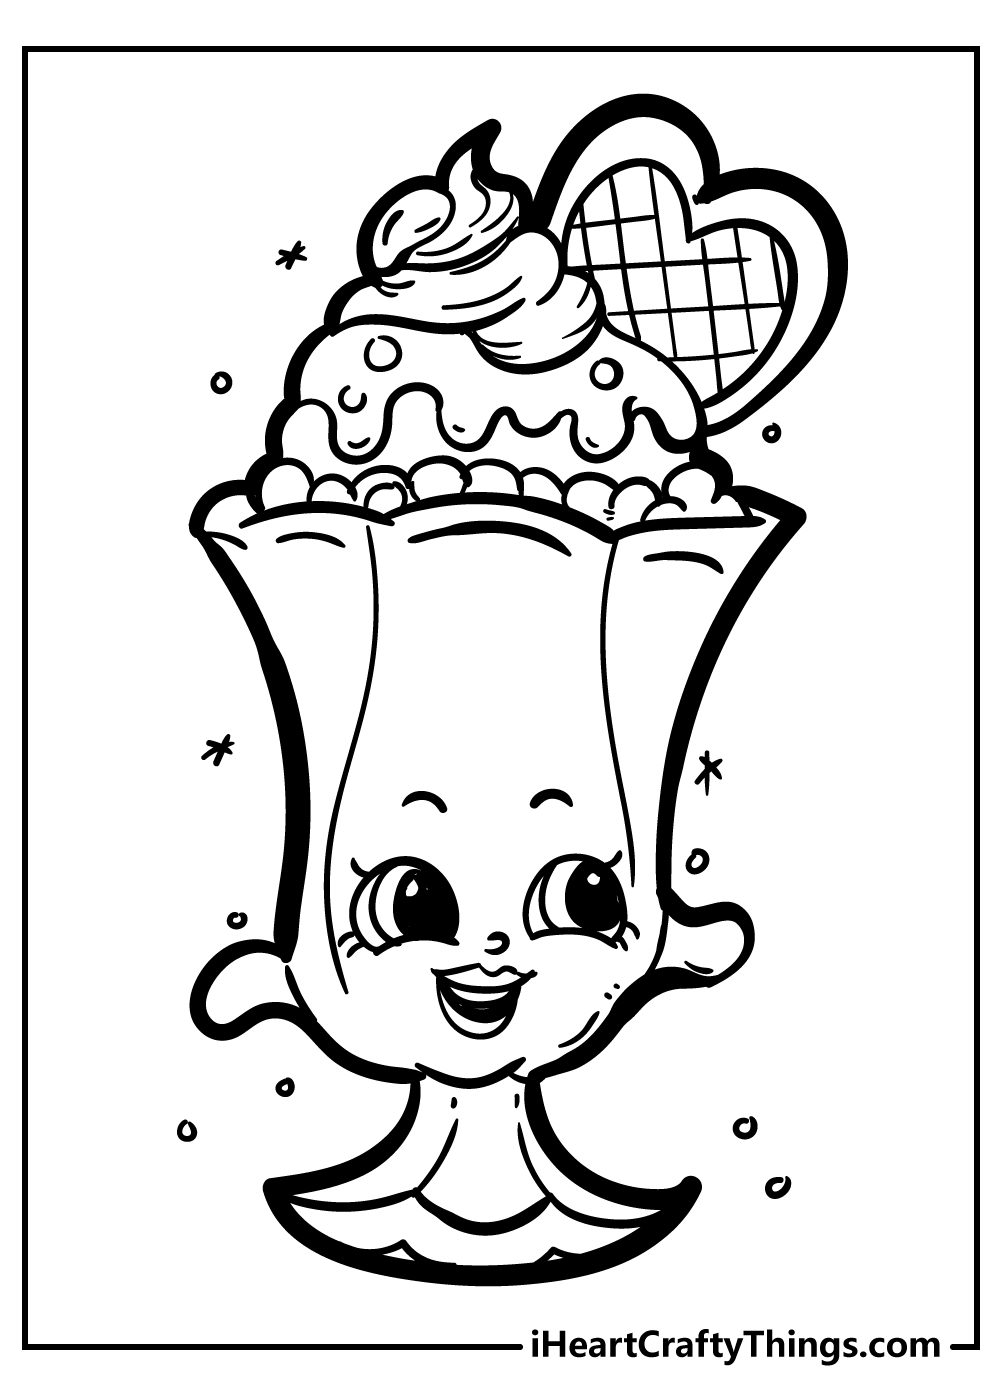 Shopkins coloring pages free printables